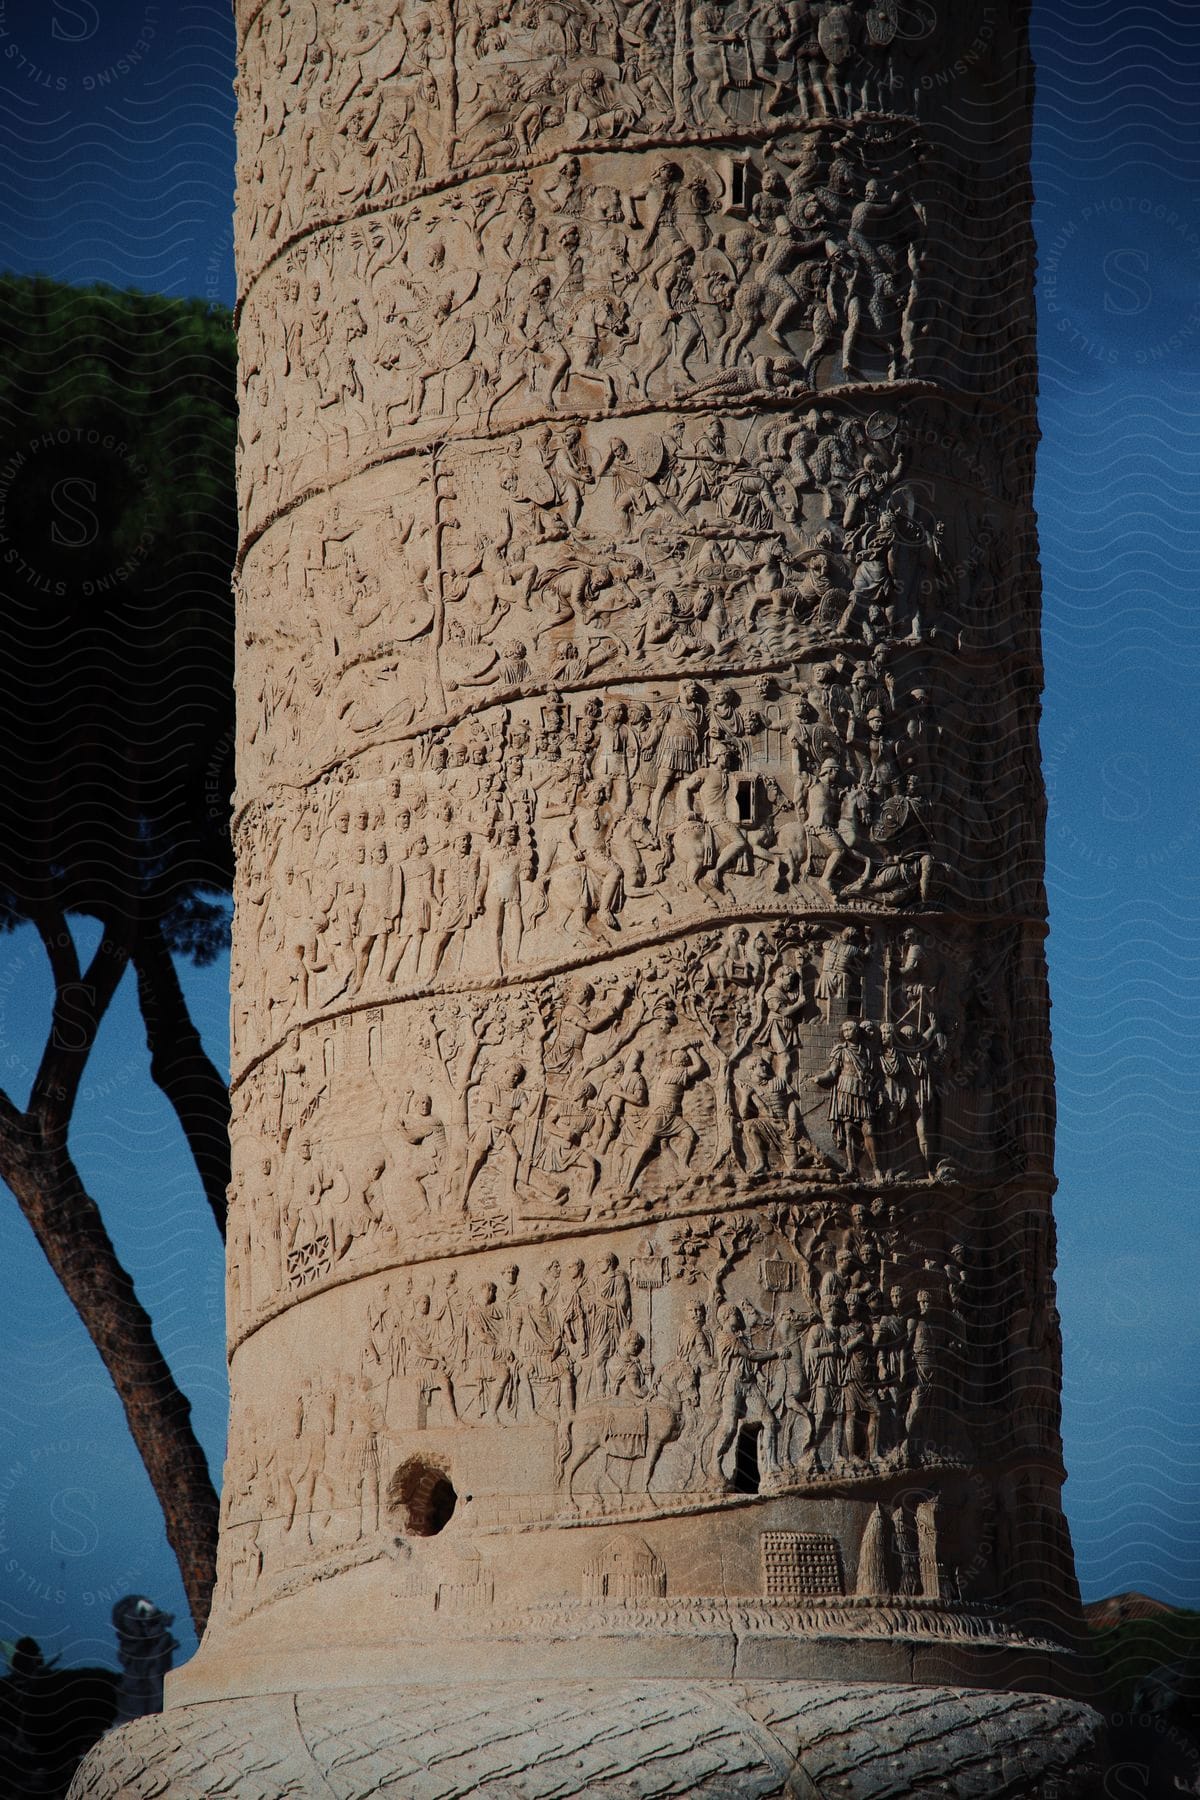 A tall pole-like structure shows several ancient carvings of people and icons from history.